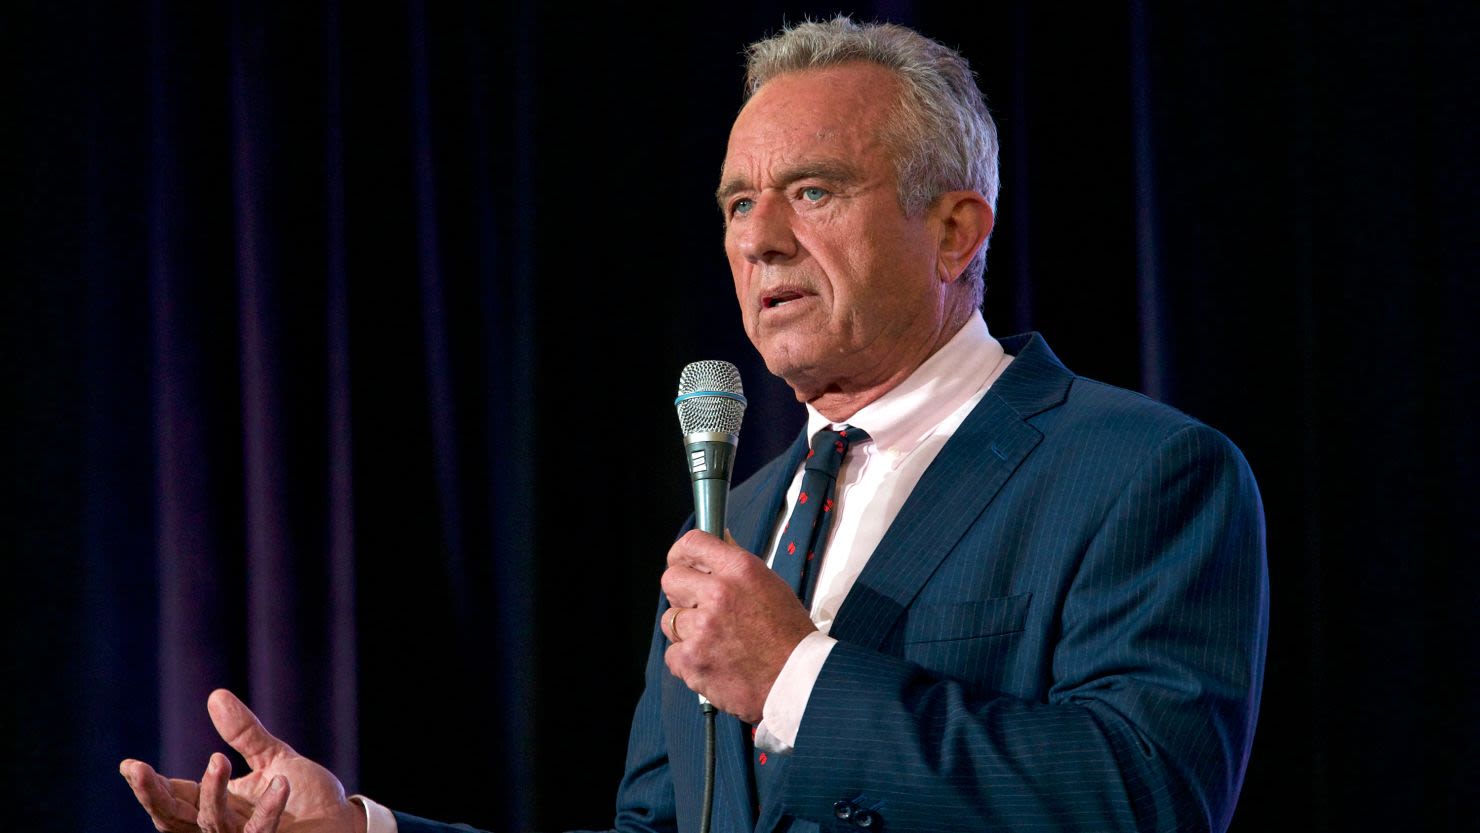 RFK Jr. loses in first round of Libertarian Party’s presidential nomination vote. Trump didn’t file paperwork to qualify | CNN Politics